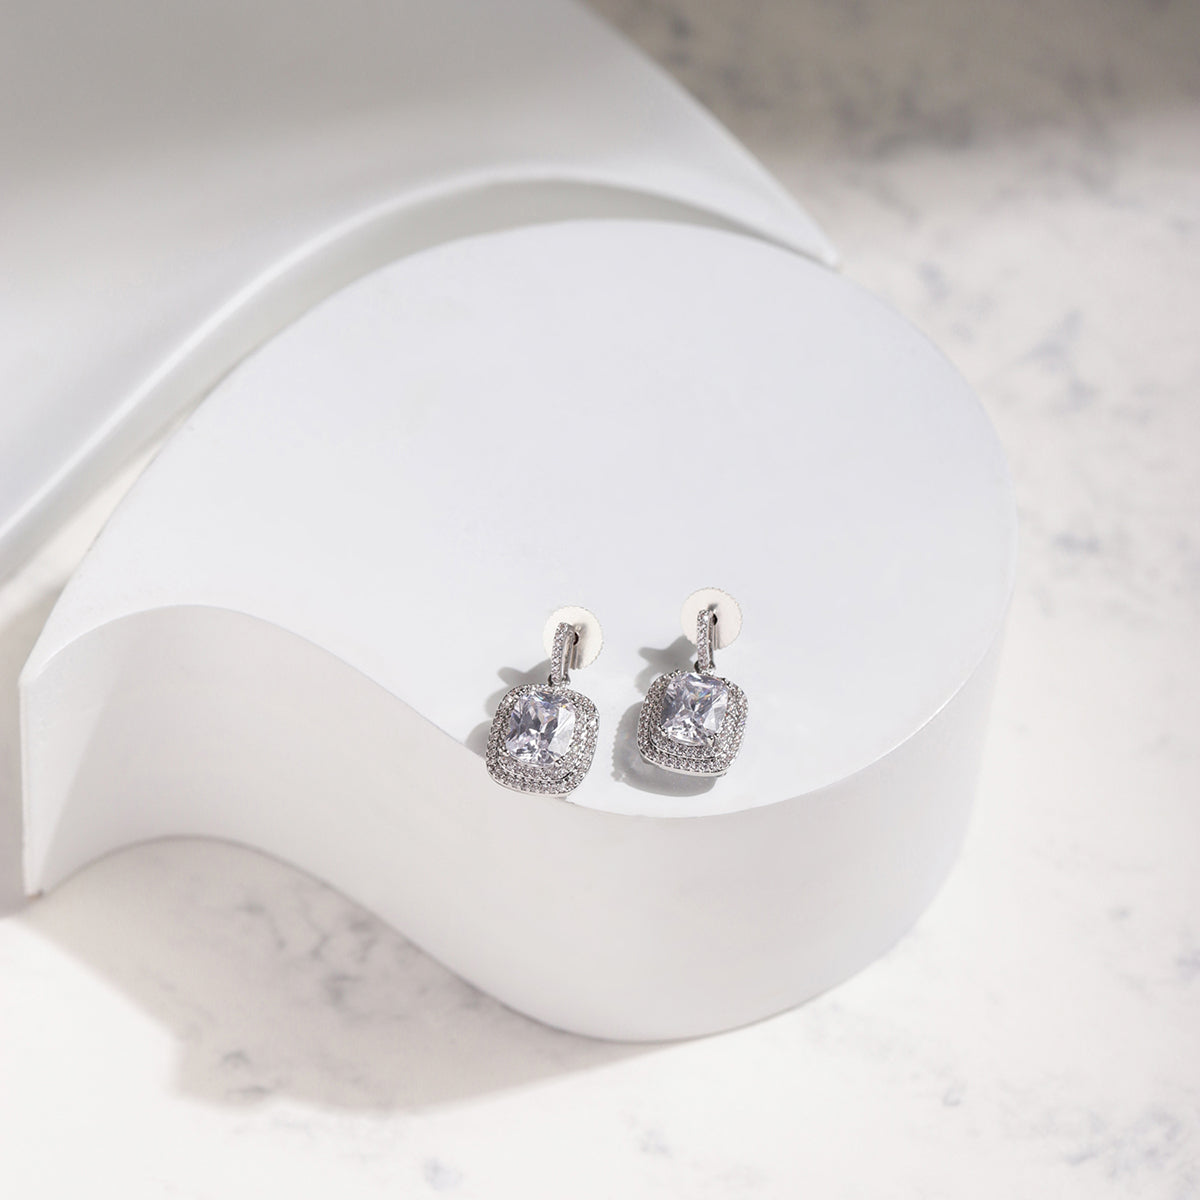 Silver-Toned Contemporary Sliver Plated Studs Earrings